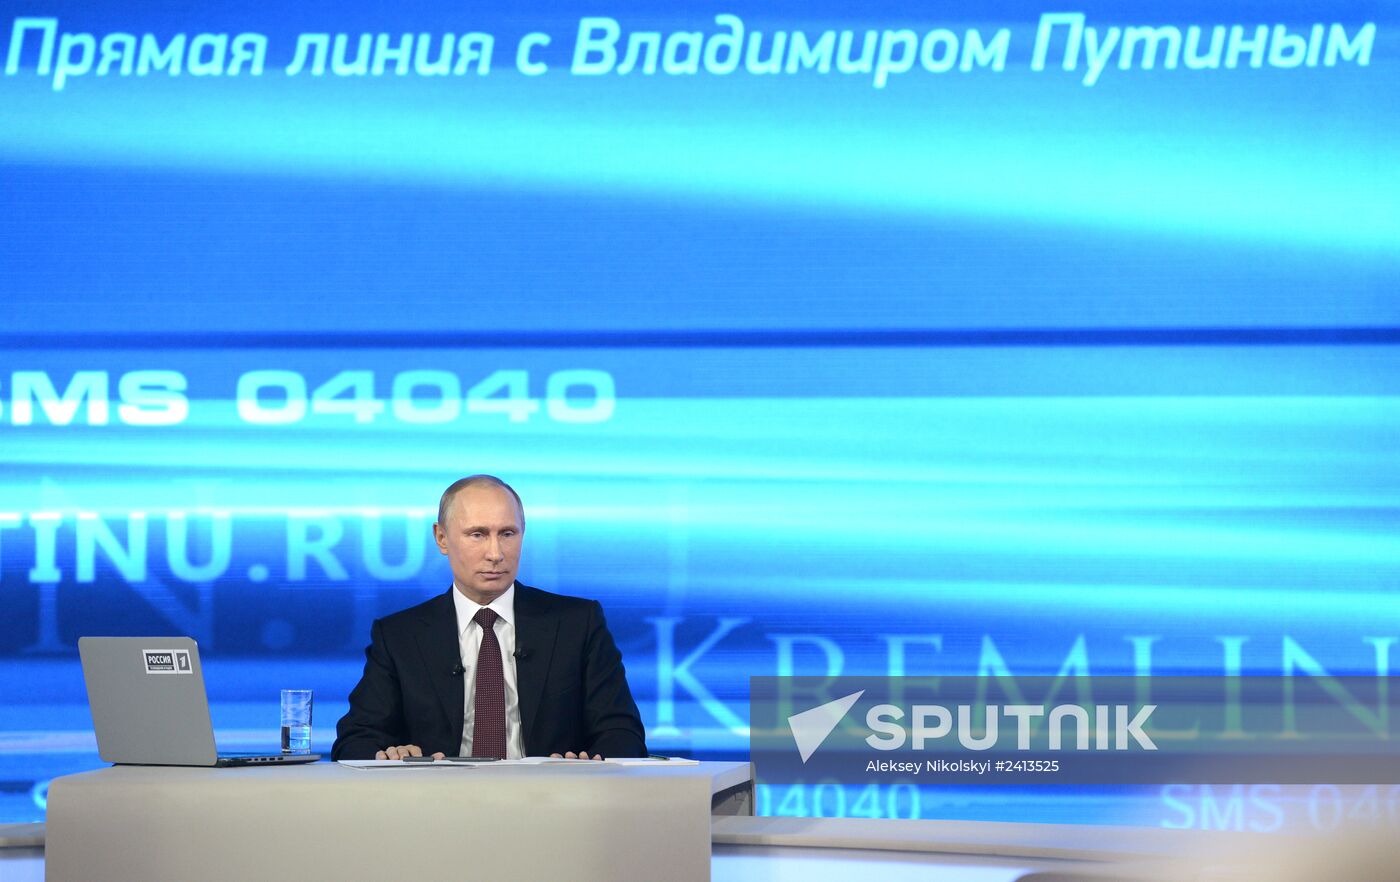 Vladimir Putin holds question and answer session